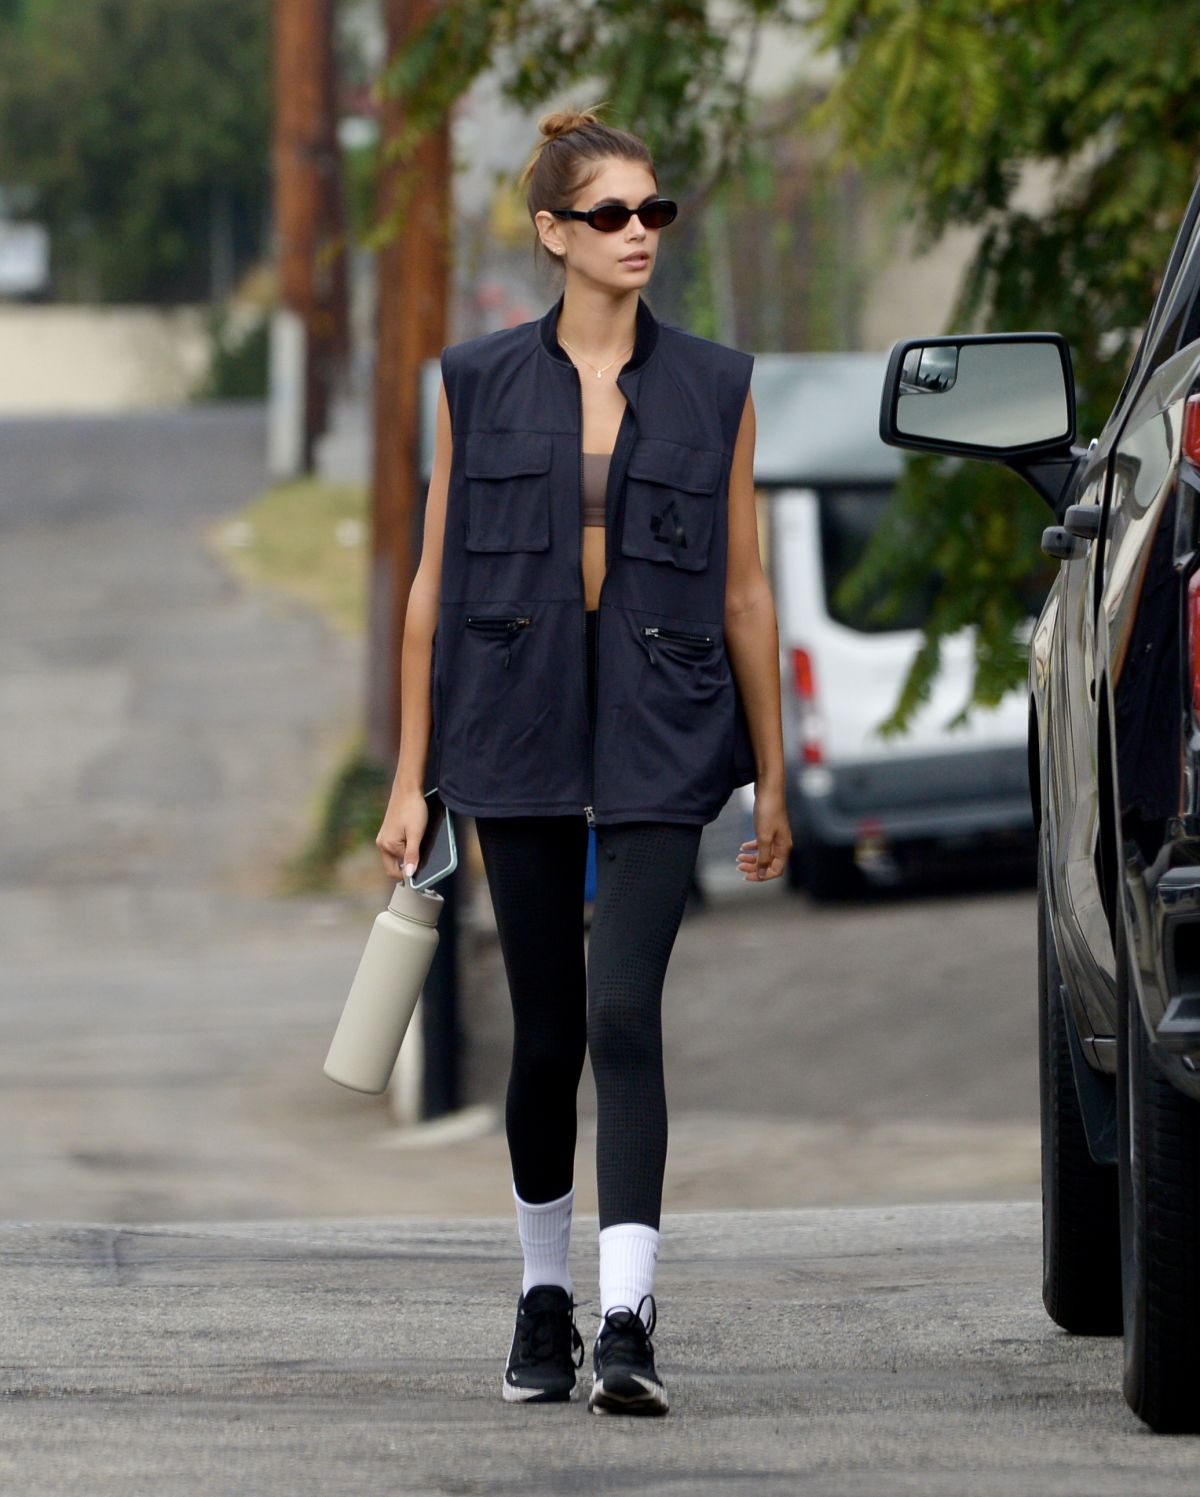 KAIA GERBER Leaves Intense Workout at a Gym in Los Angeles 09/30/2022 ...